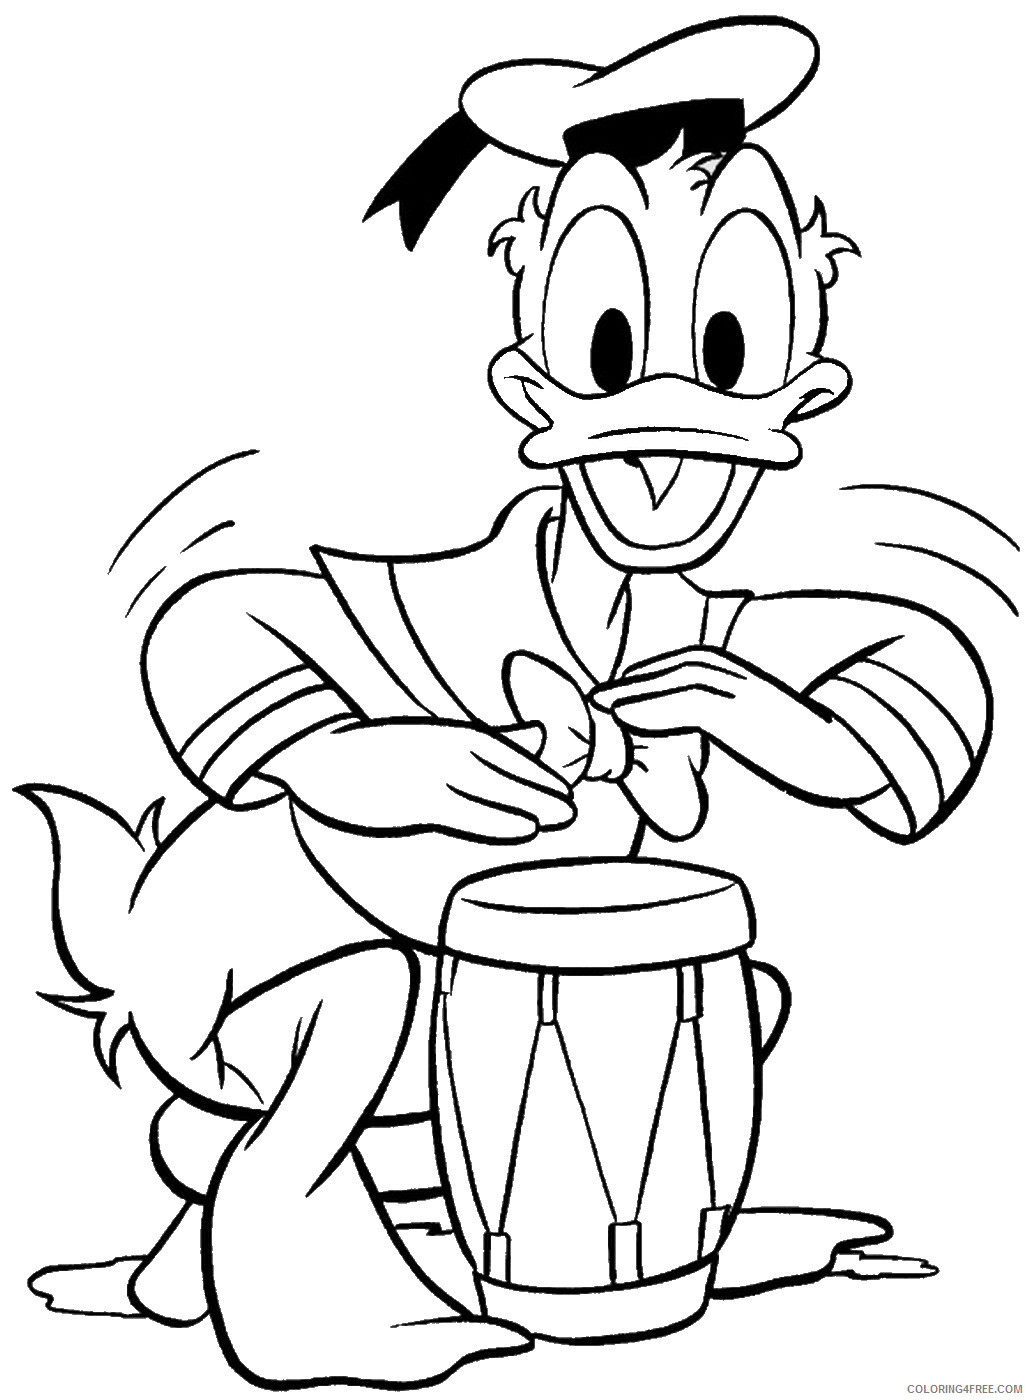 Donald Duck Coloring Pages Cartoons donald_14 Printable 2020 2514 Coloring4free